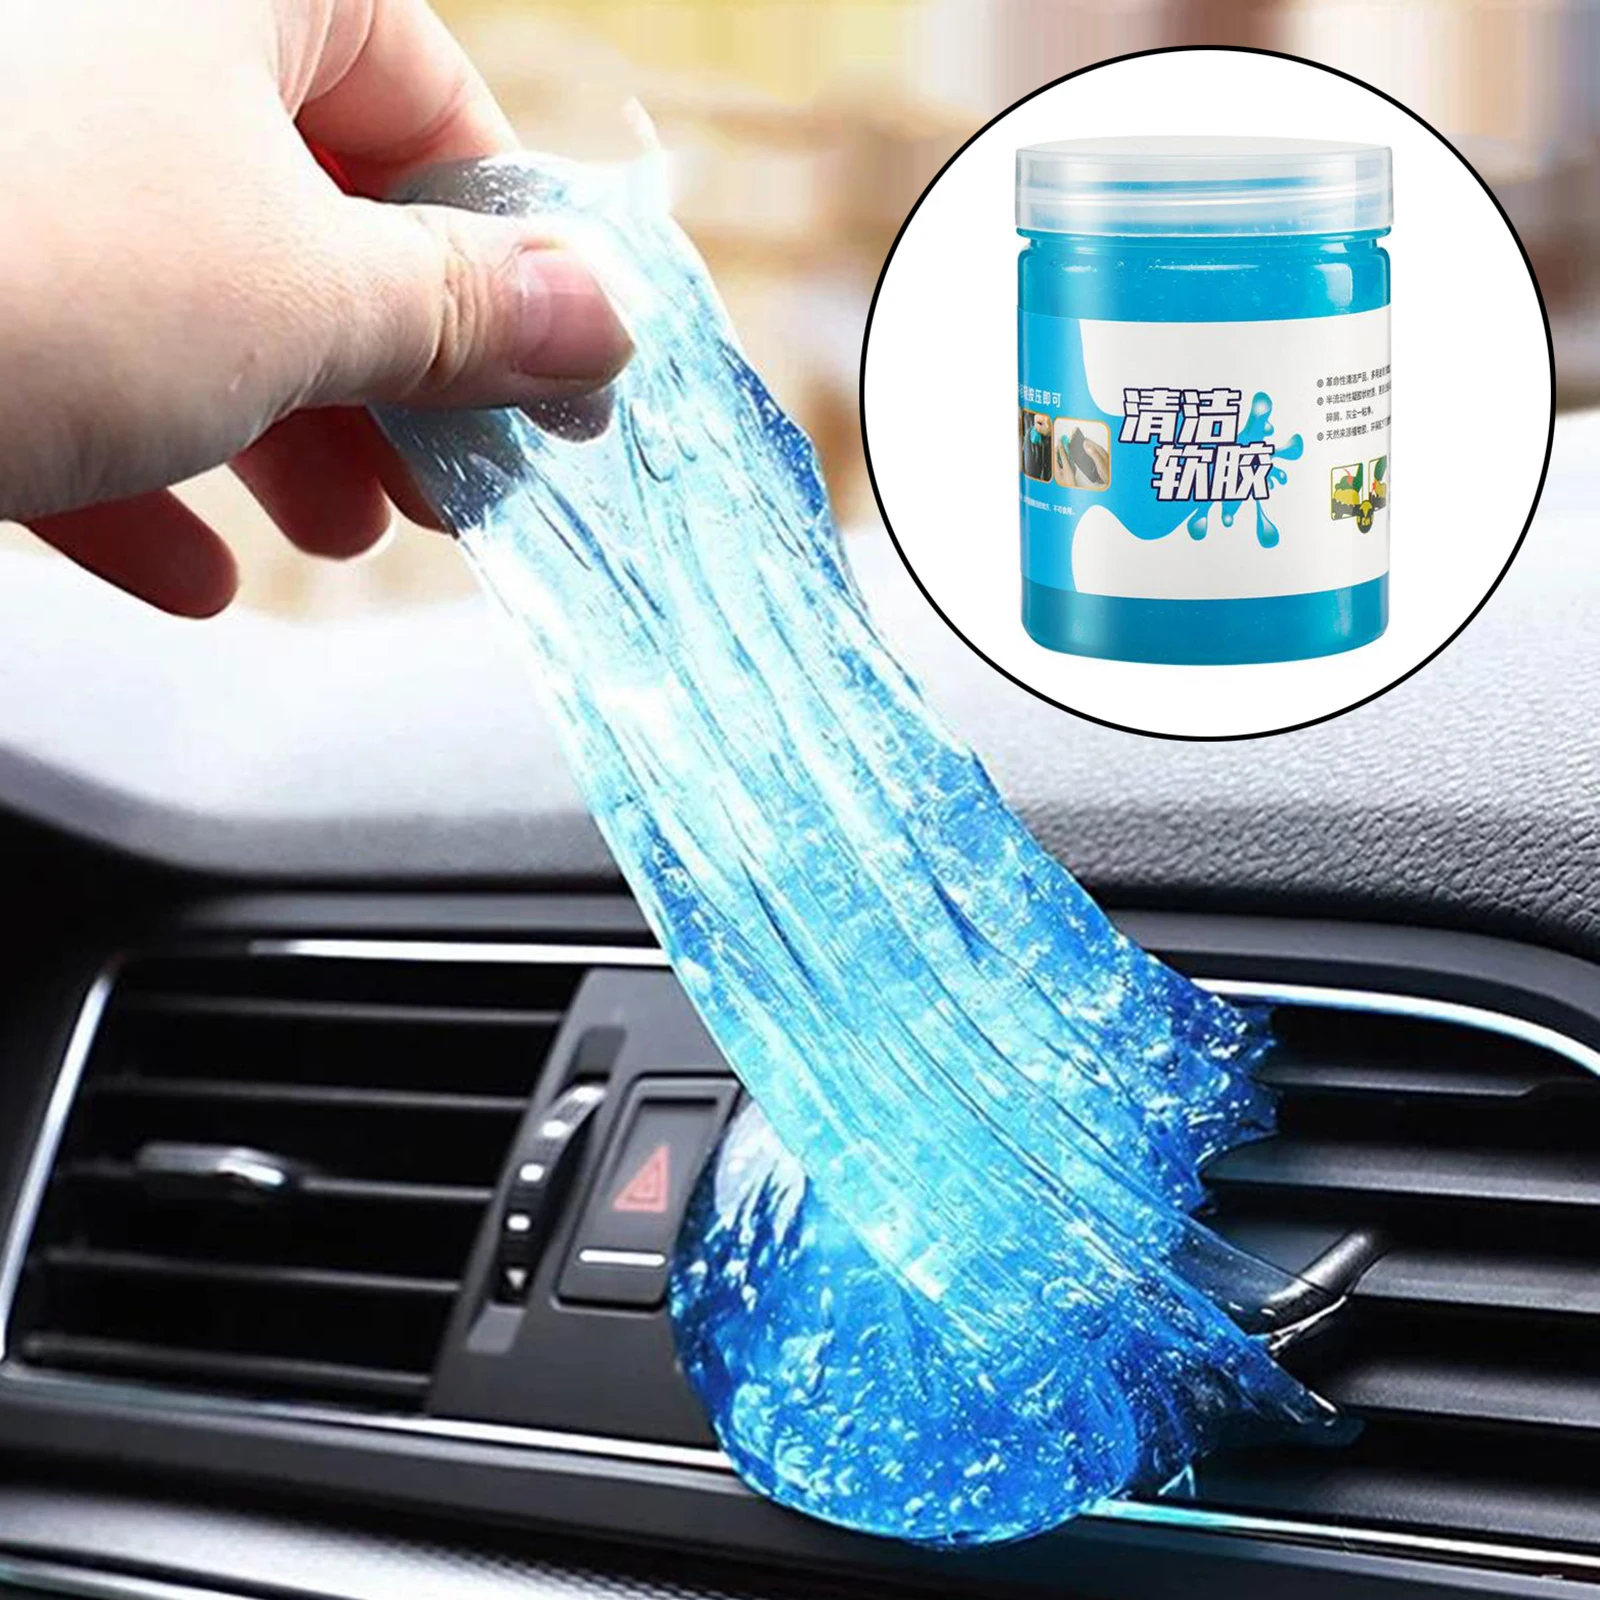 Universal Cleaning Gel for Car Detailing, Reusable Car Interior Cleaner Putty, Auto Slime Dust Car Cleaner Supplies, Size: 200g, Green